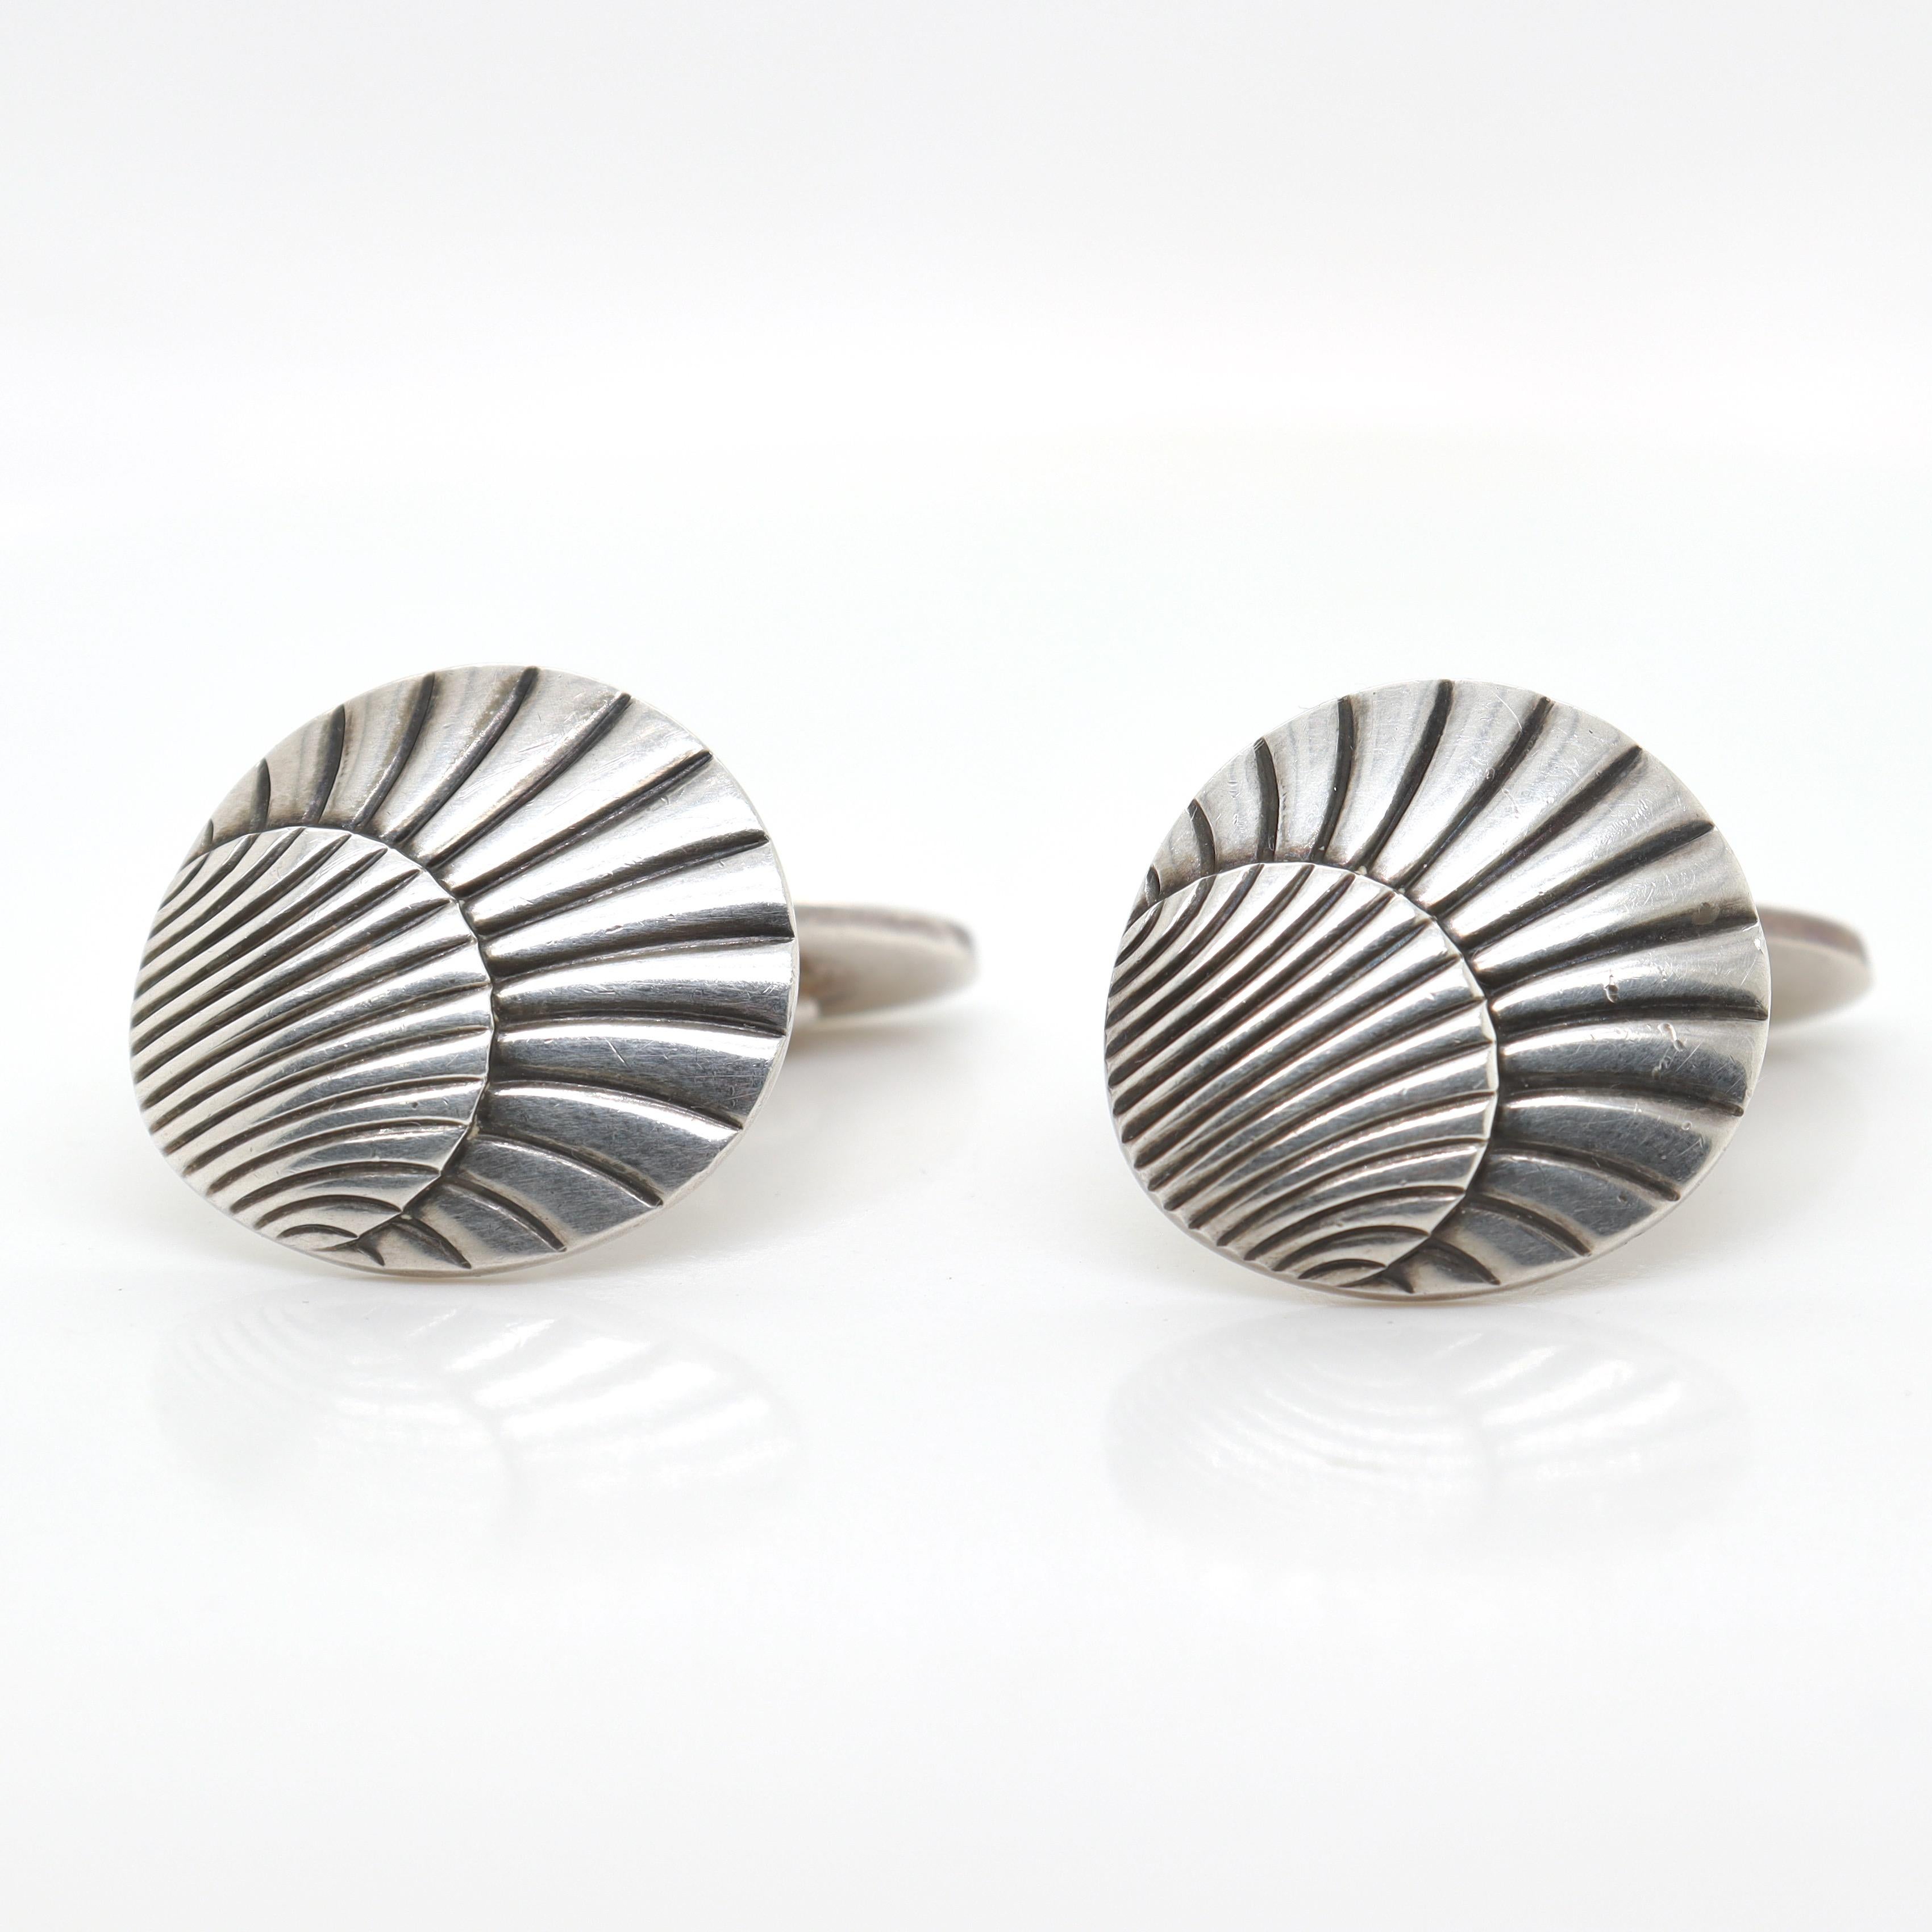 A fine pair of Georg Jensen sterling silver cufflinks

Model no. 99.

Simply a wonderful pair of cufflinks from one of Denmark's premier silversmiths!

Date:
20th Century, post-1945

Overall Condition:
They are in overall good, as-pictured, used